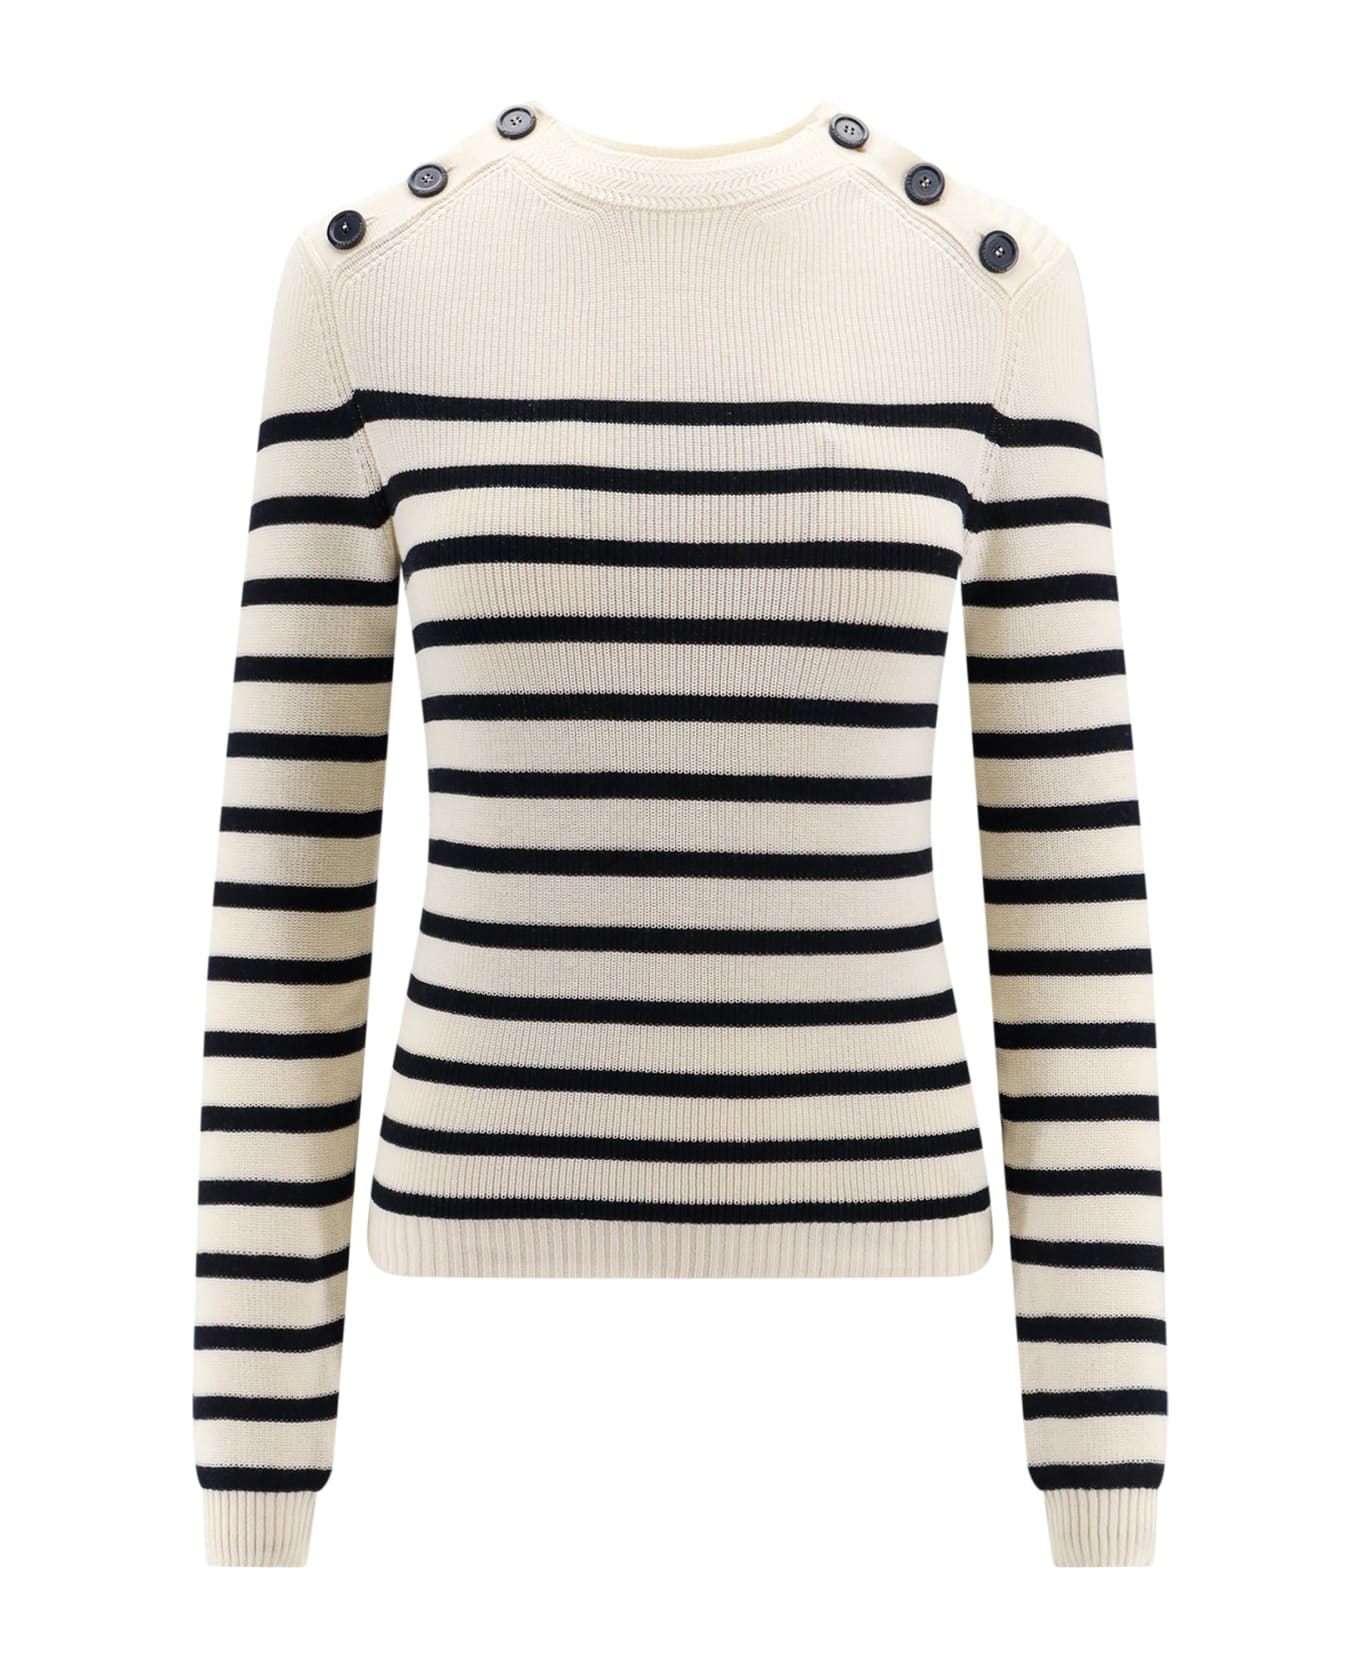 SEMICOUTURE Sweater - Bianco Navy